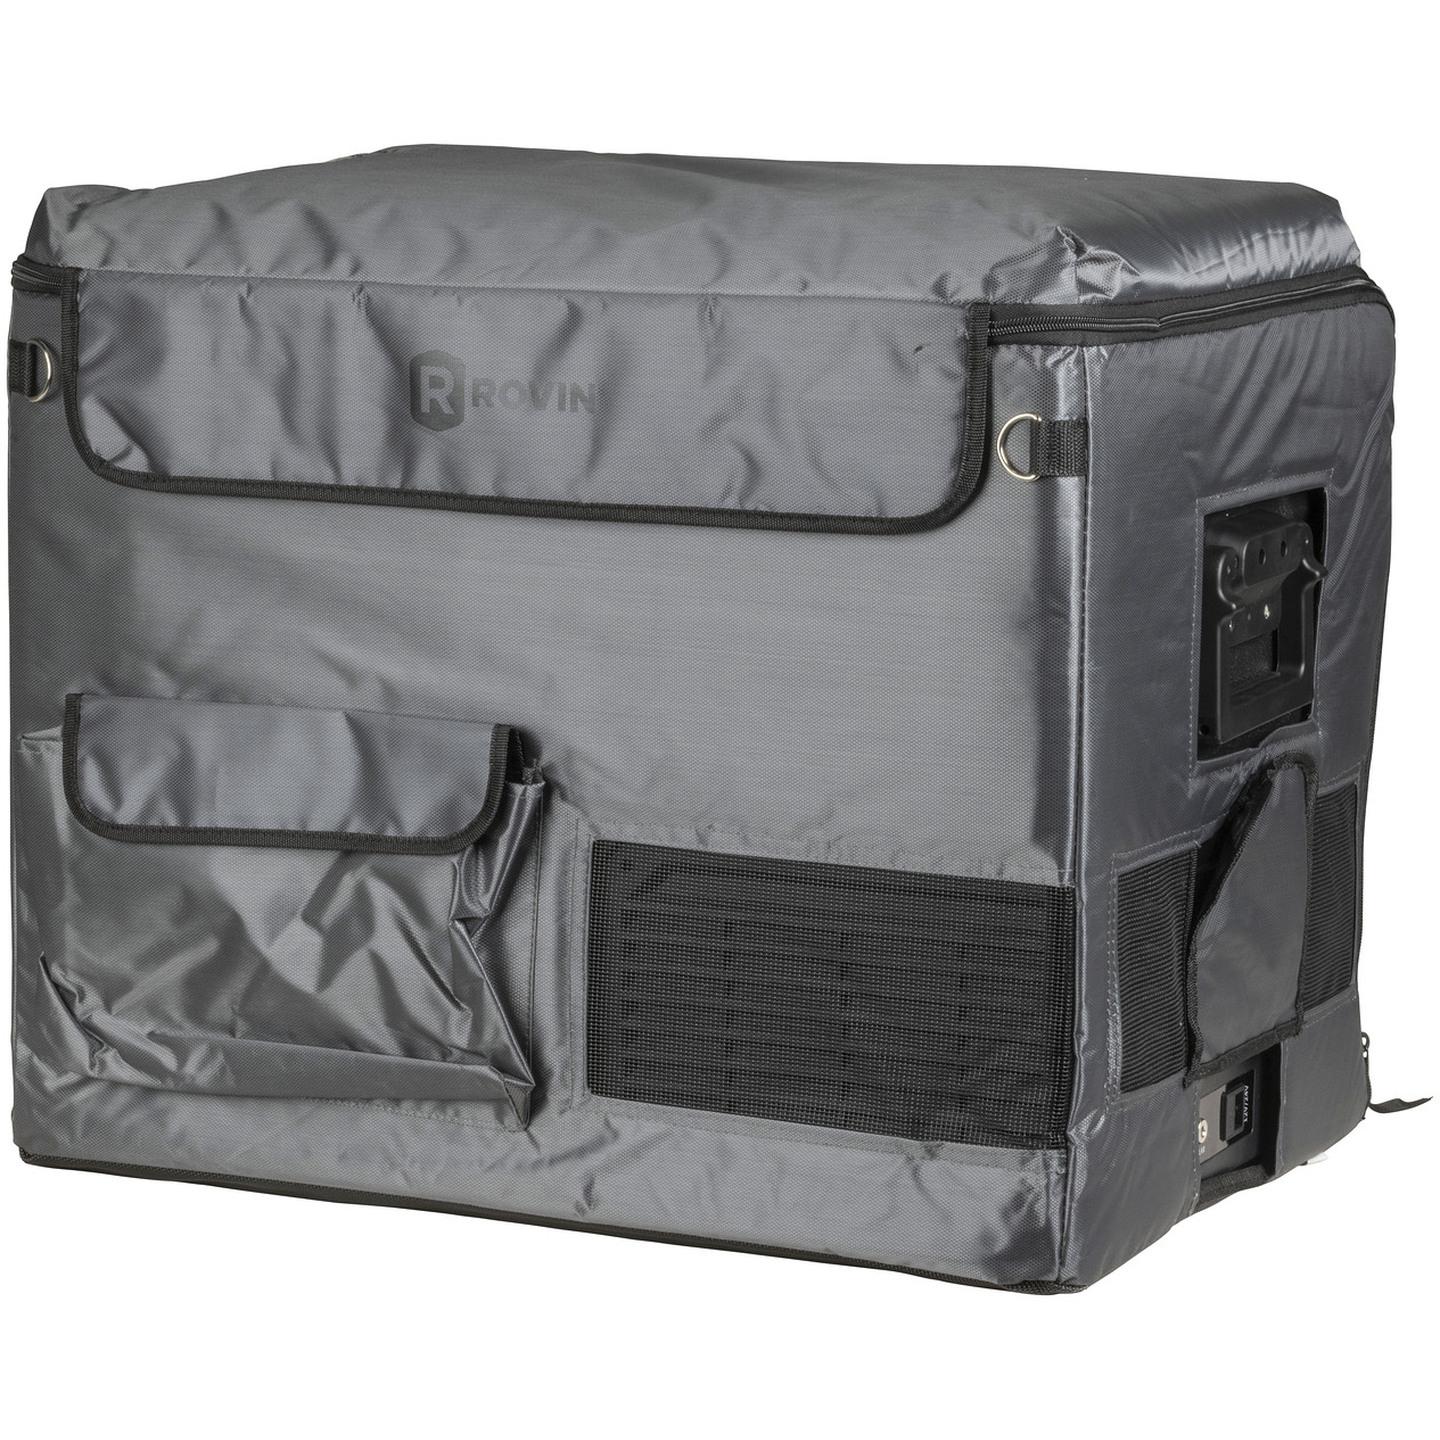 Insulated Cover for 45L Rovin Portable Dual Zone Fridge Freezer